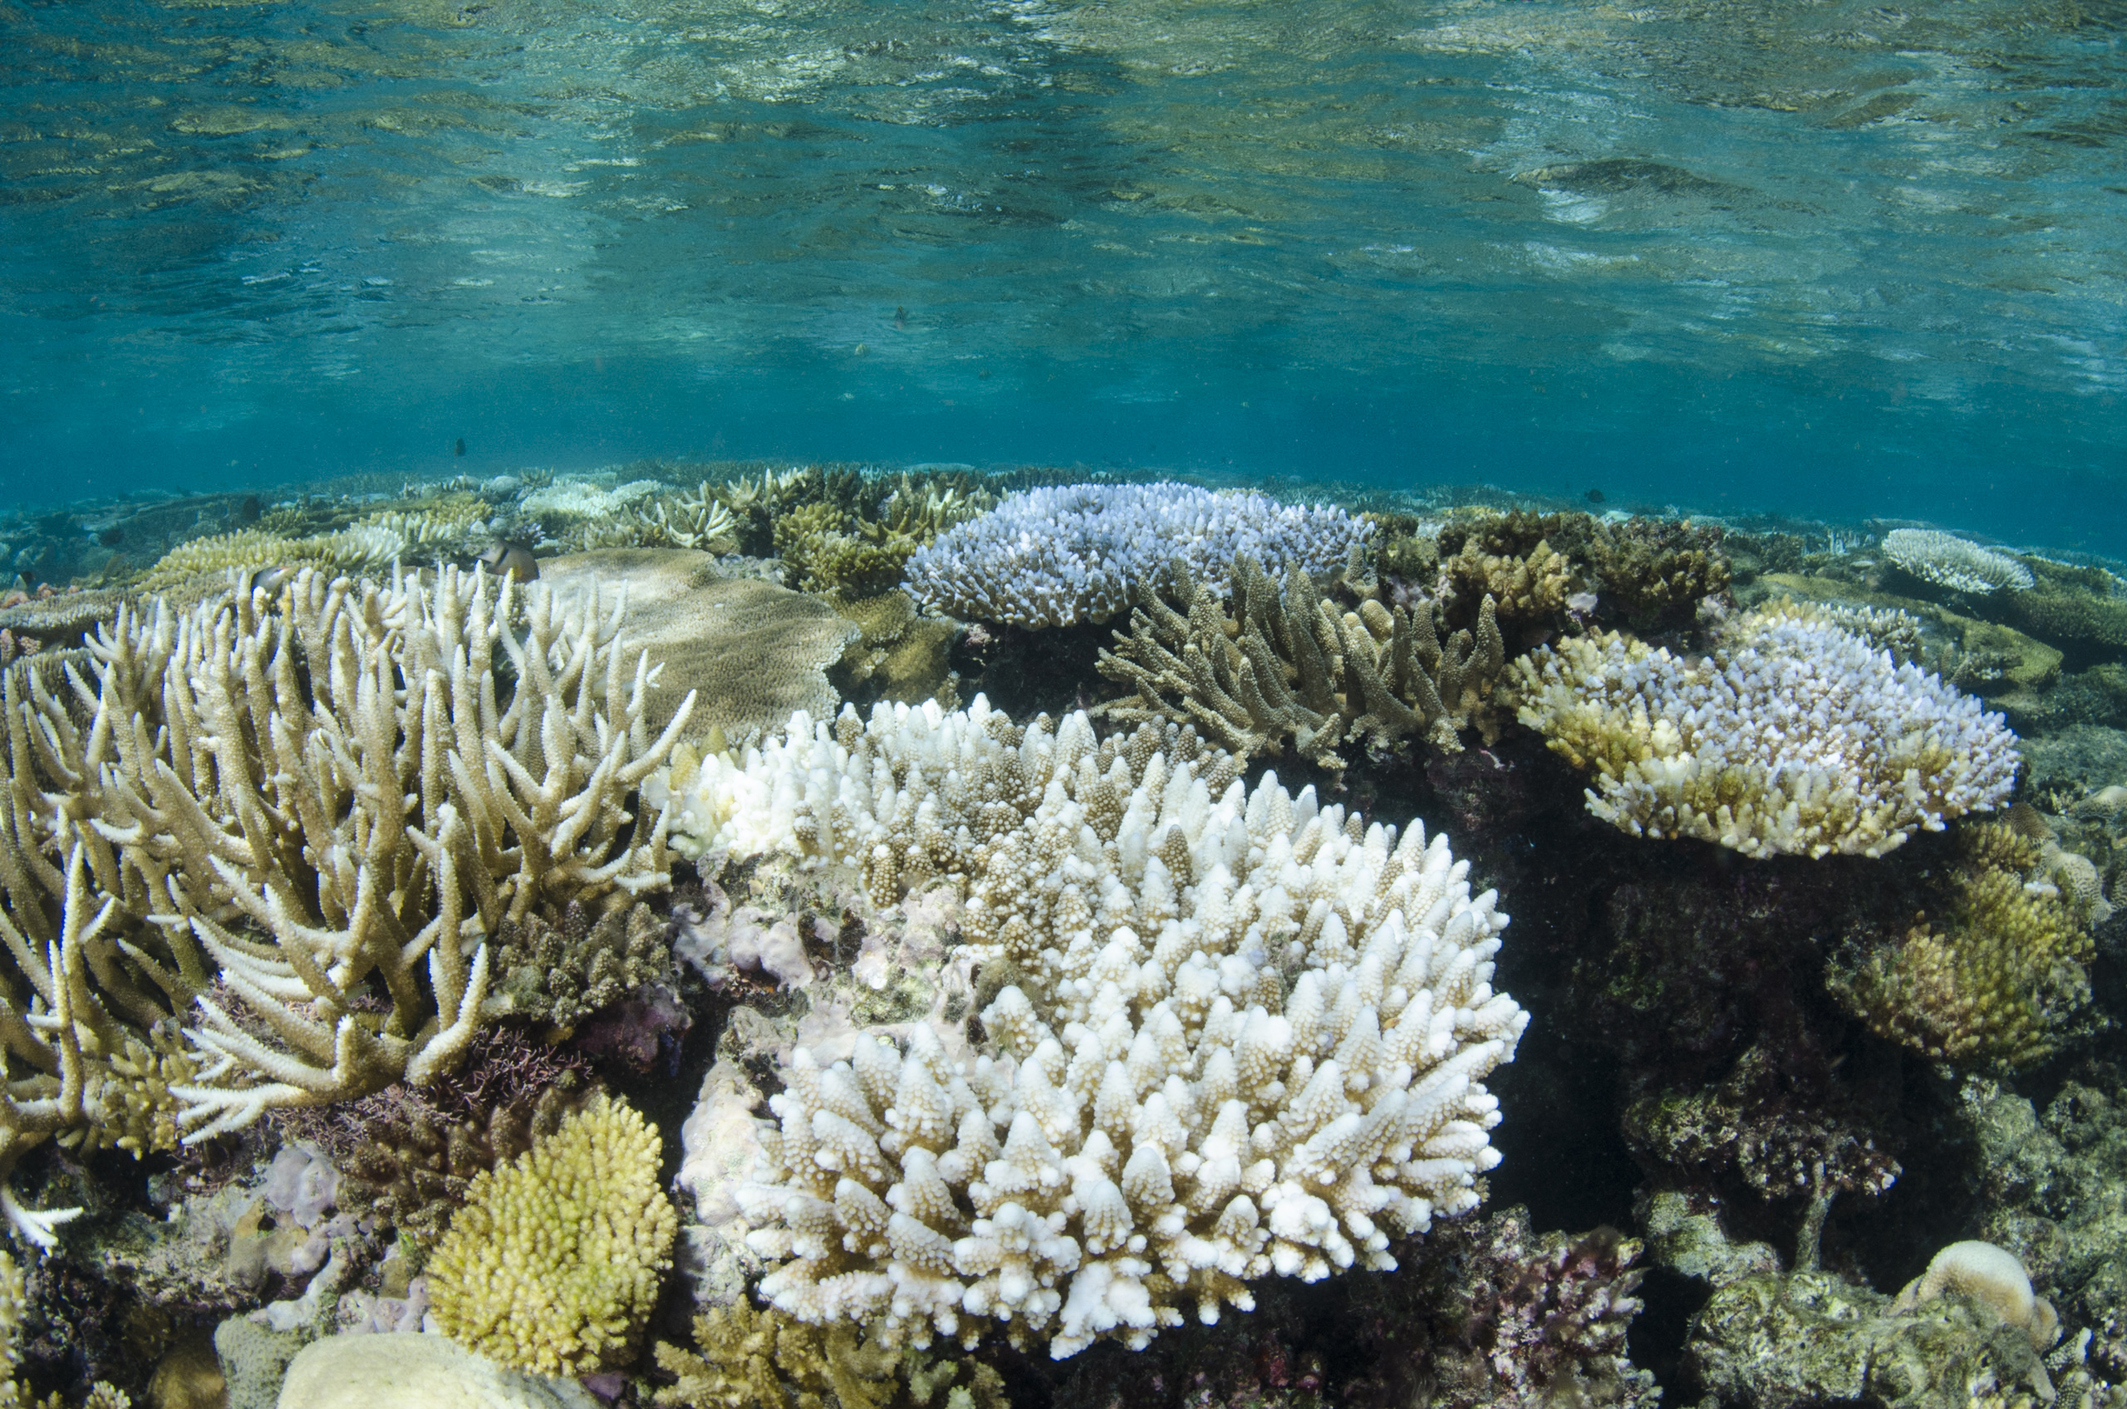 Coral bleaching is the loss of intracellular endosymbionts (Symbiodinium, also known as zooxanthellae) through either expulsion or loss of algal pigmentation. (Danita Delimont—Getty Images/Gallo Images)